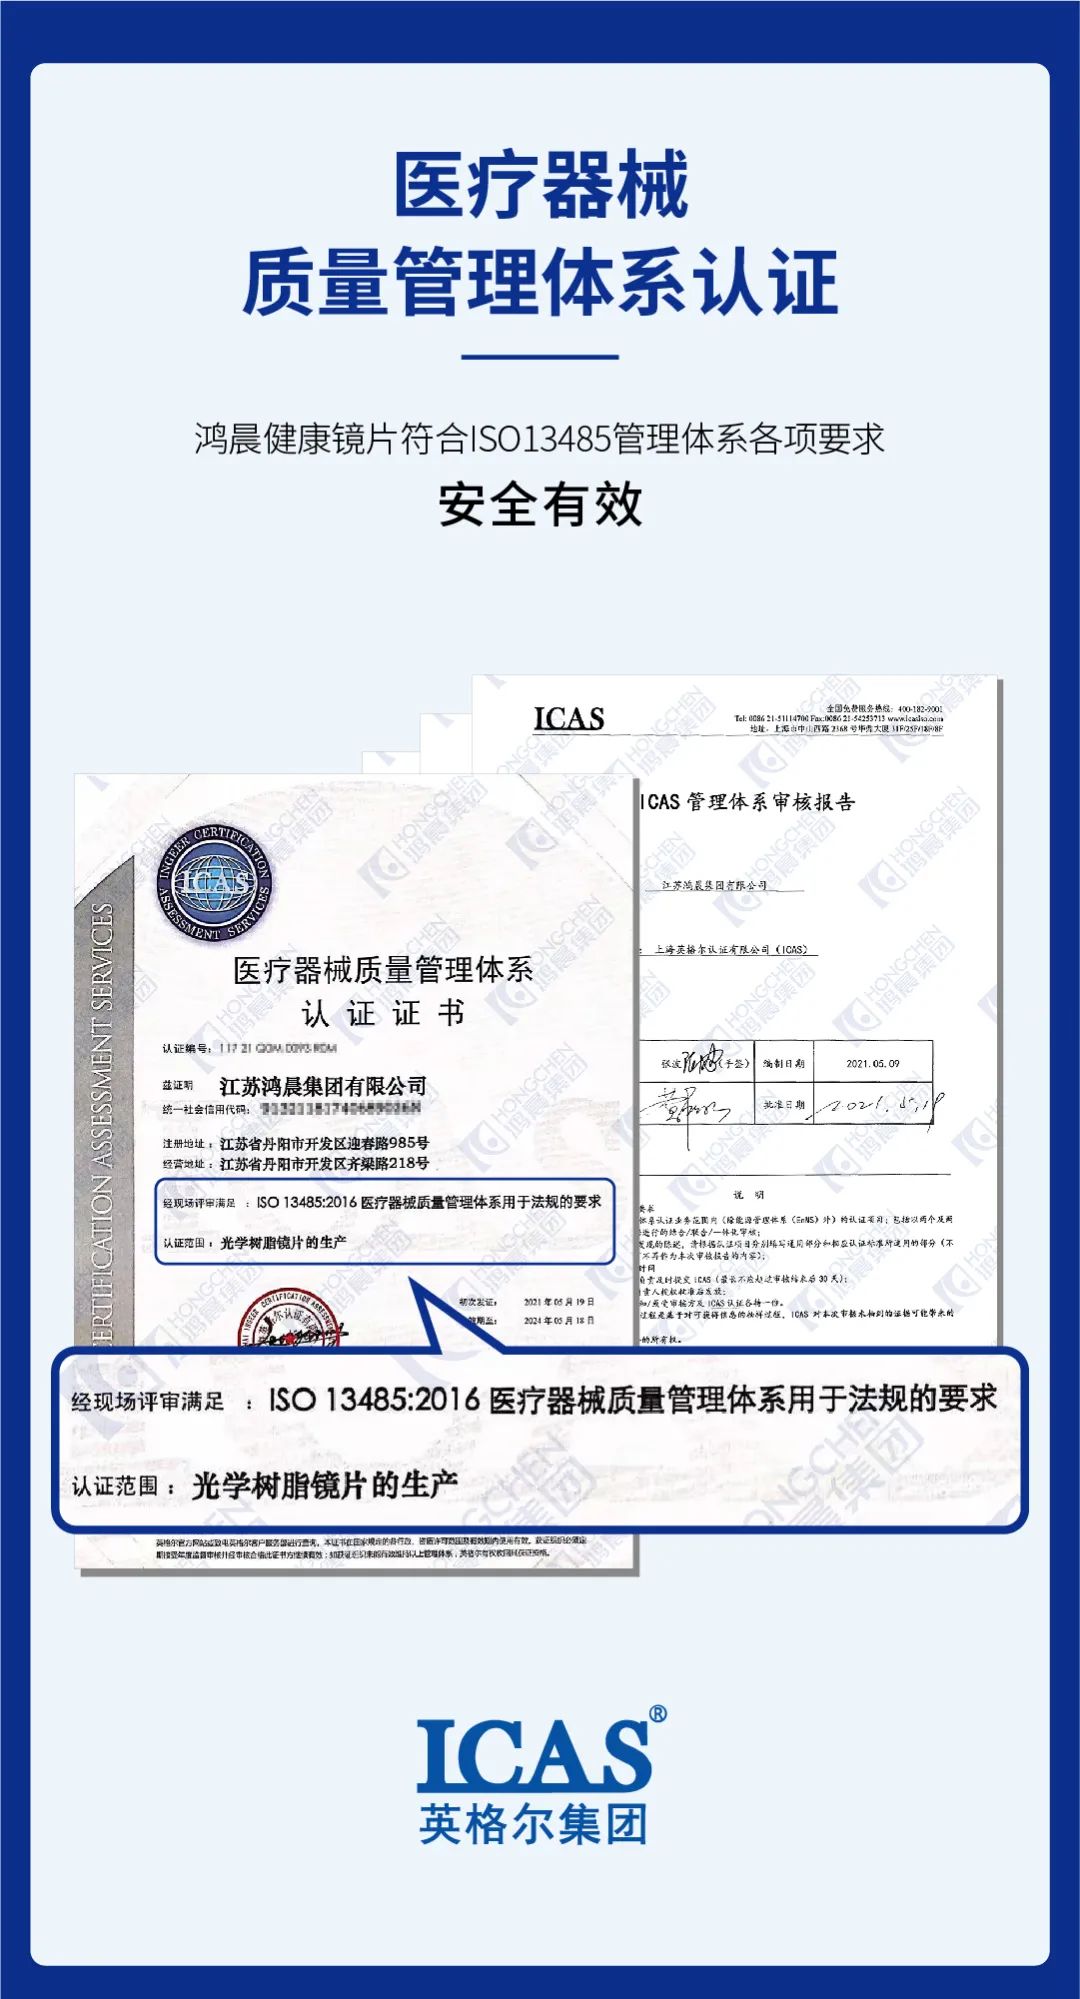 Hongchen lens won the medical safety system certification